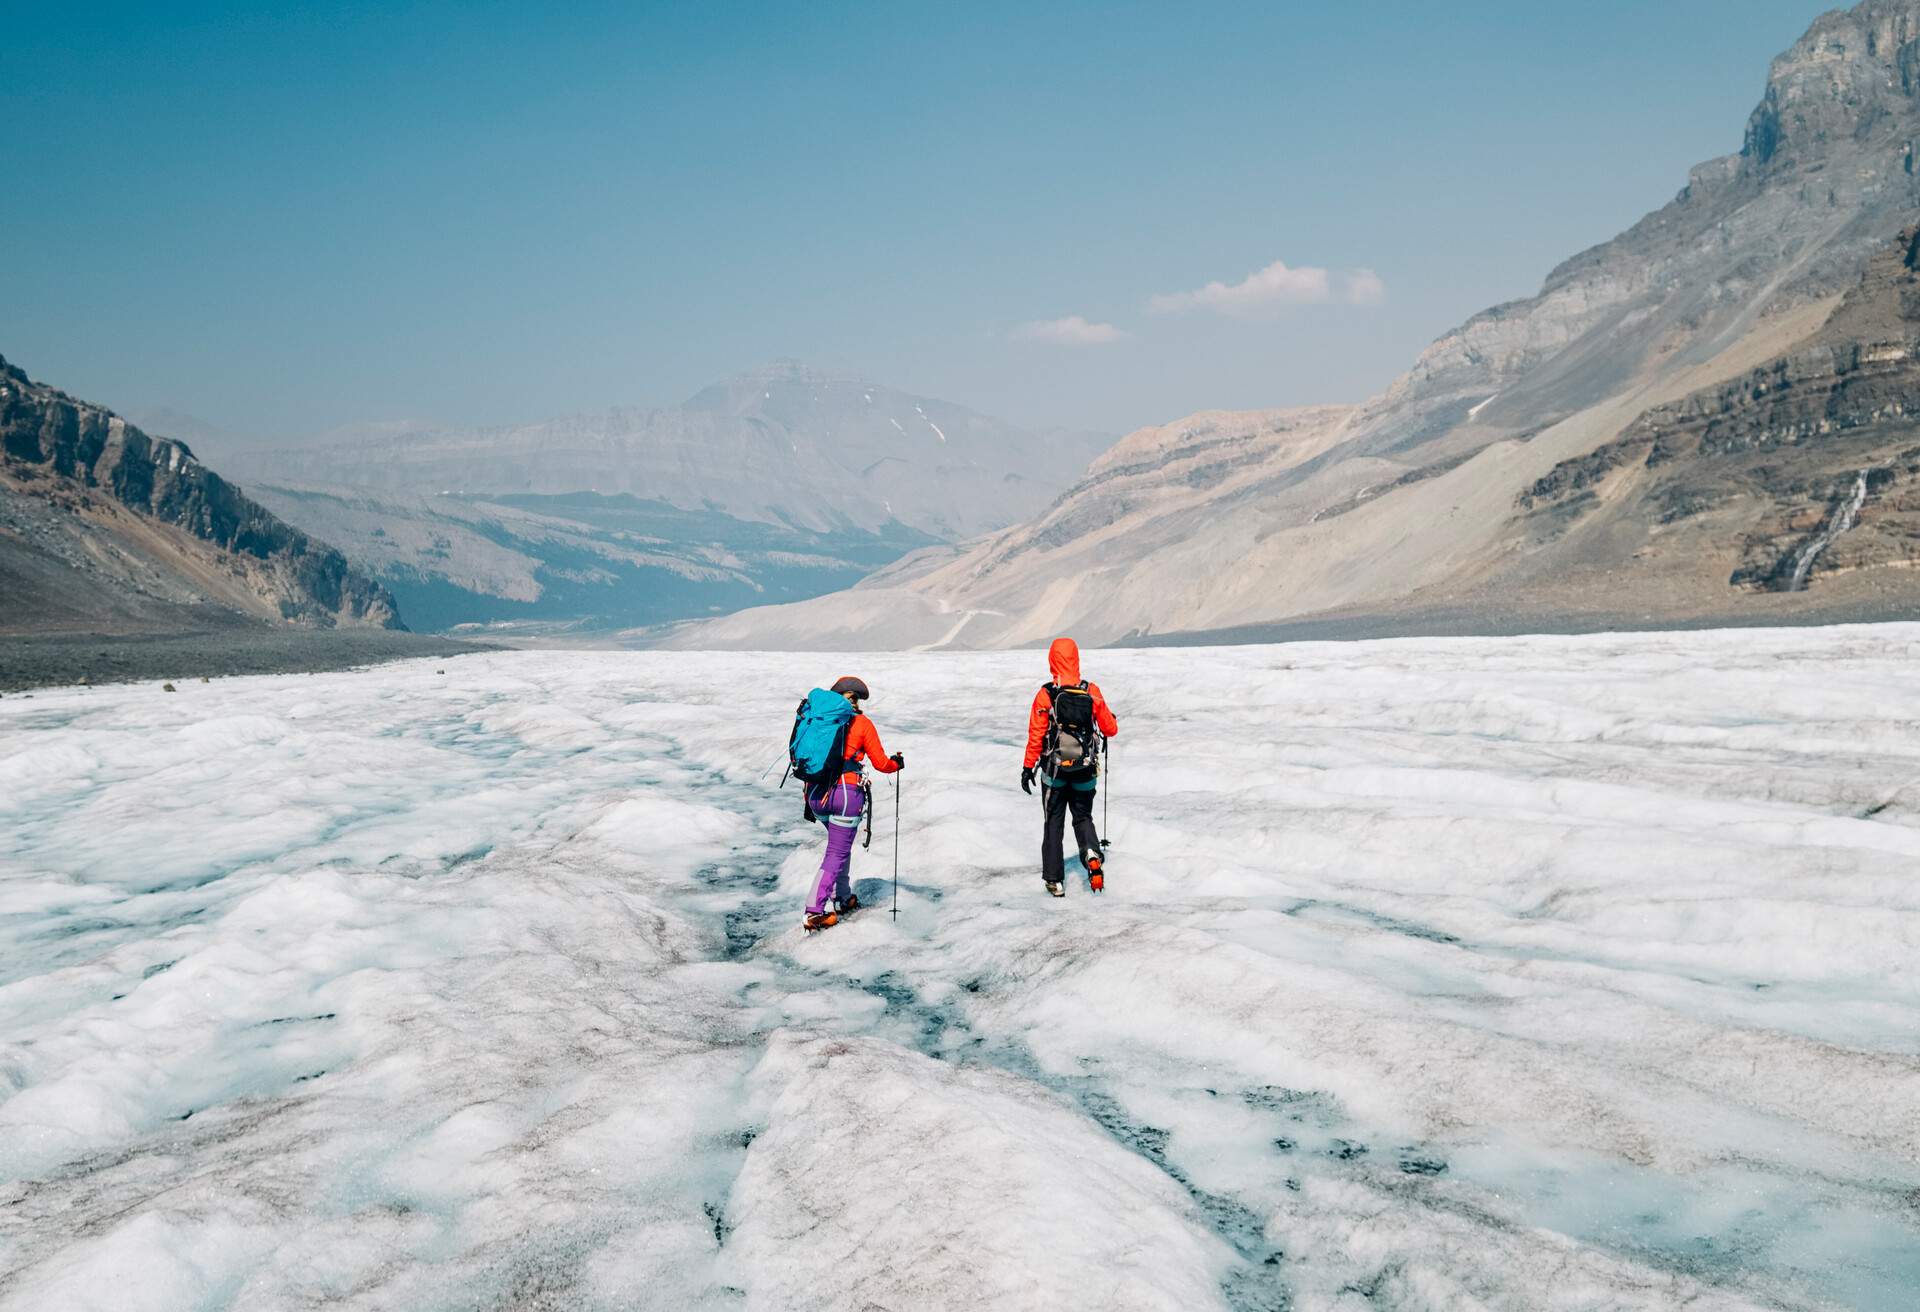 Lake Louise, AB , CAN - July , 19, 2021: Two female mountain climbers walks down the bare ice of the long Athabasca Glacier in Jasper National Park on July 19th, 2021. On her back is a large backpack..(Photo by Alex Ratson via Getty Images)